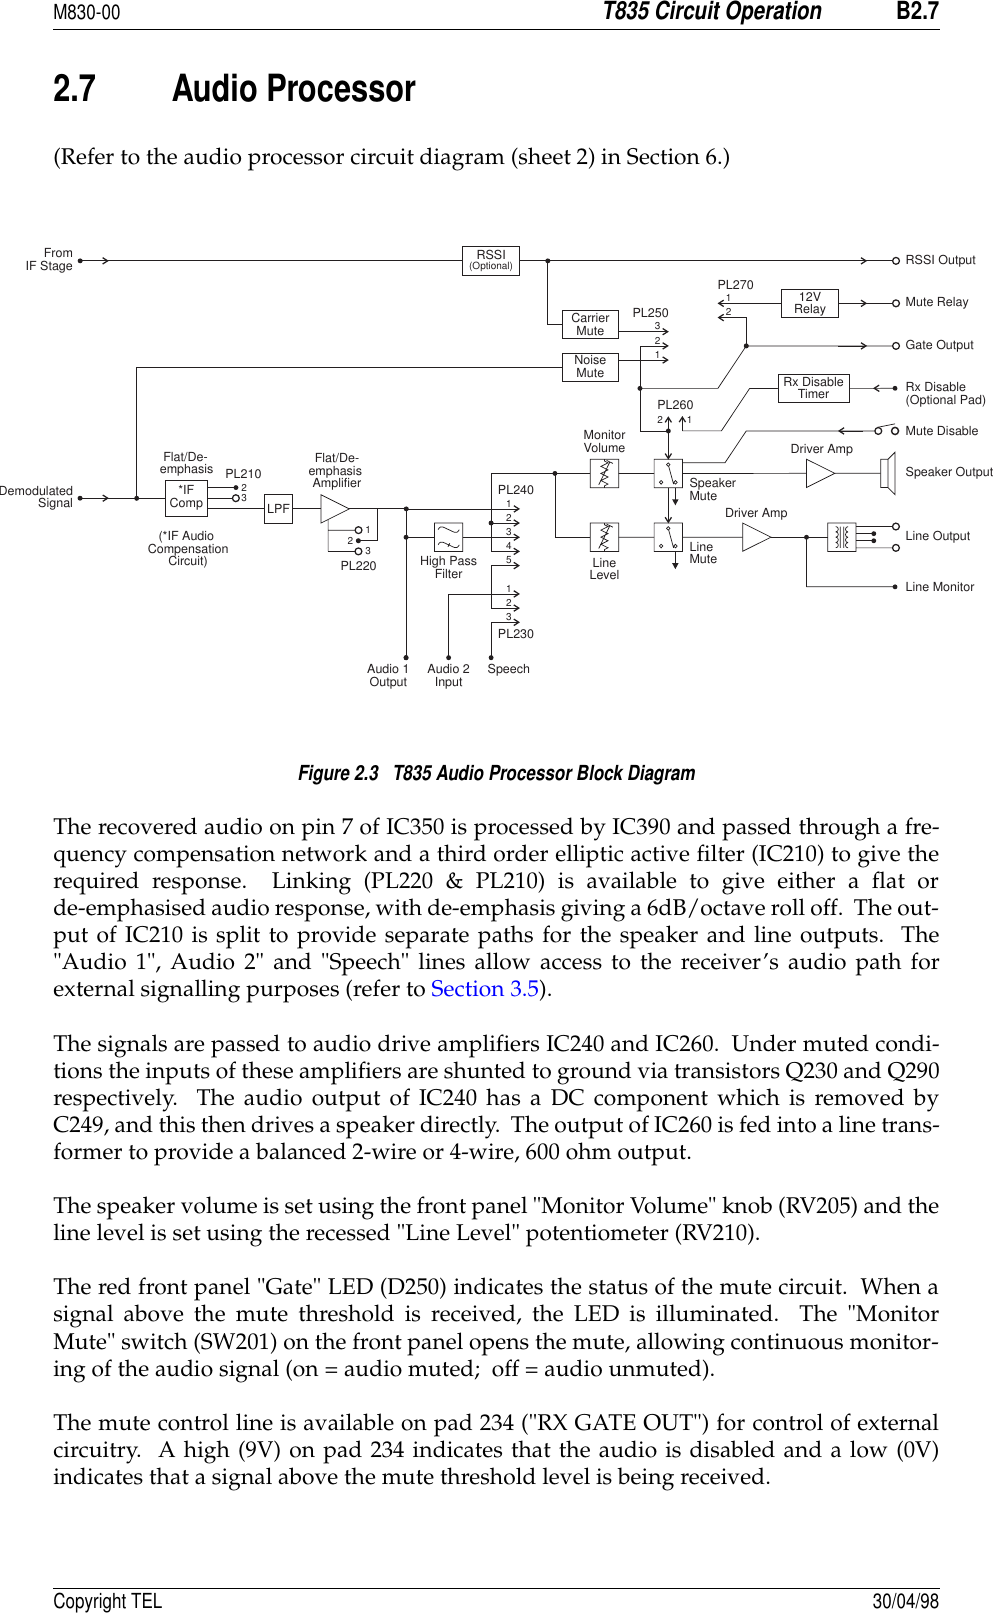 M830-00T835 Circuit OperationB2.7Copyright TEL 30/04/982.7 Audio Processor(Refer to the audio processor circuit diagram (sheet 2) in Section 6.)Figure 2.3   T835 Audio Processor Block DiagramThe recovered audio on pin 7 of IC350 is processed by IC390 and passed through a fre-quency compensation network and a third order elliptic active filter (IC210) to give therequired response.  Linking (PL220 &amp; PL210) is available to give either a flat orde-emphasised audio response, with de-emphasis giving a 6dB/octave roll off.  The out-put of IC210 is split to provide separate paths for the speaker and line outputs.  The&quot;Audio 1&quot;, Audio 2&quot; and &quot;Speech&quot; lines allow access to the receiver’s audio path forexternal signalling purposes (refer to Section 3.5).The signals are passed to audio drive amplifiers IC240 and IC260.  Under muted condi-tions the inputs of these amplifiers are shunted to ground via transistors Q230 and Q290respectively.  The audio output of IC240 has a DC component which is removed byC249, and this then drives a speaker directly.  The output of IC260 is fed into a line trans-former to provide a balanced 2-wire or 4-wire, 600 ohm output.The speaker volume is set using the front panel &quot;Monitor Volume&quot; knob (RV205) and theline level is set using the recessed &quot;Line Level&quot; potentiometer (RV210).  The red front panel &quot;Gate&quot; LED (D250) indicates the status of the mute circuit.  When asignal above the mute threshold is received, the LED is illuminated.  The &quot;MonitorMute&quot; switch (SW201) on the front panel opens the mute, allowing continuous monitor-ing of the audio signal (on = audio muted;  off = audio unmuted).The mute control line is available on pad 234 (&quot;RX GATE OUT&quot;) for control of externalcircuitry.  A high (9V) on pad 234 indicates that the audio is disabled and a low (0V)indicates that a signal above the mute threshold level is being received.FromIF StageDemodulatedSignal(*IF AudioCompensationCircuit)Driver AmpLine Output12VRelaySpeechAudio 1Output Audio 2InputHigh PassFilterSpeakerMuteLineMuteCarrierMuteRSSI(Optional)Rx DisableTimerNoiseMutePL260PL250PL270RSSI OutputMute RelayGate OutputRx Disable(Optional Pad)Mute DisableSpeaker OutputLine Monitor121221315223341PL240PL230Driver AmpFlat/De-emphasisLPFPL21023Flat/De-emphasisAmplifierPL220123*IFCompMonitorVolumeLineLevel